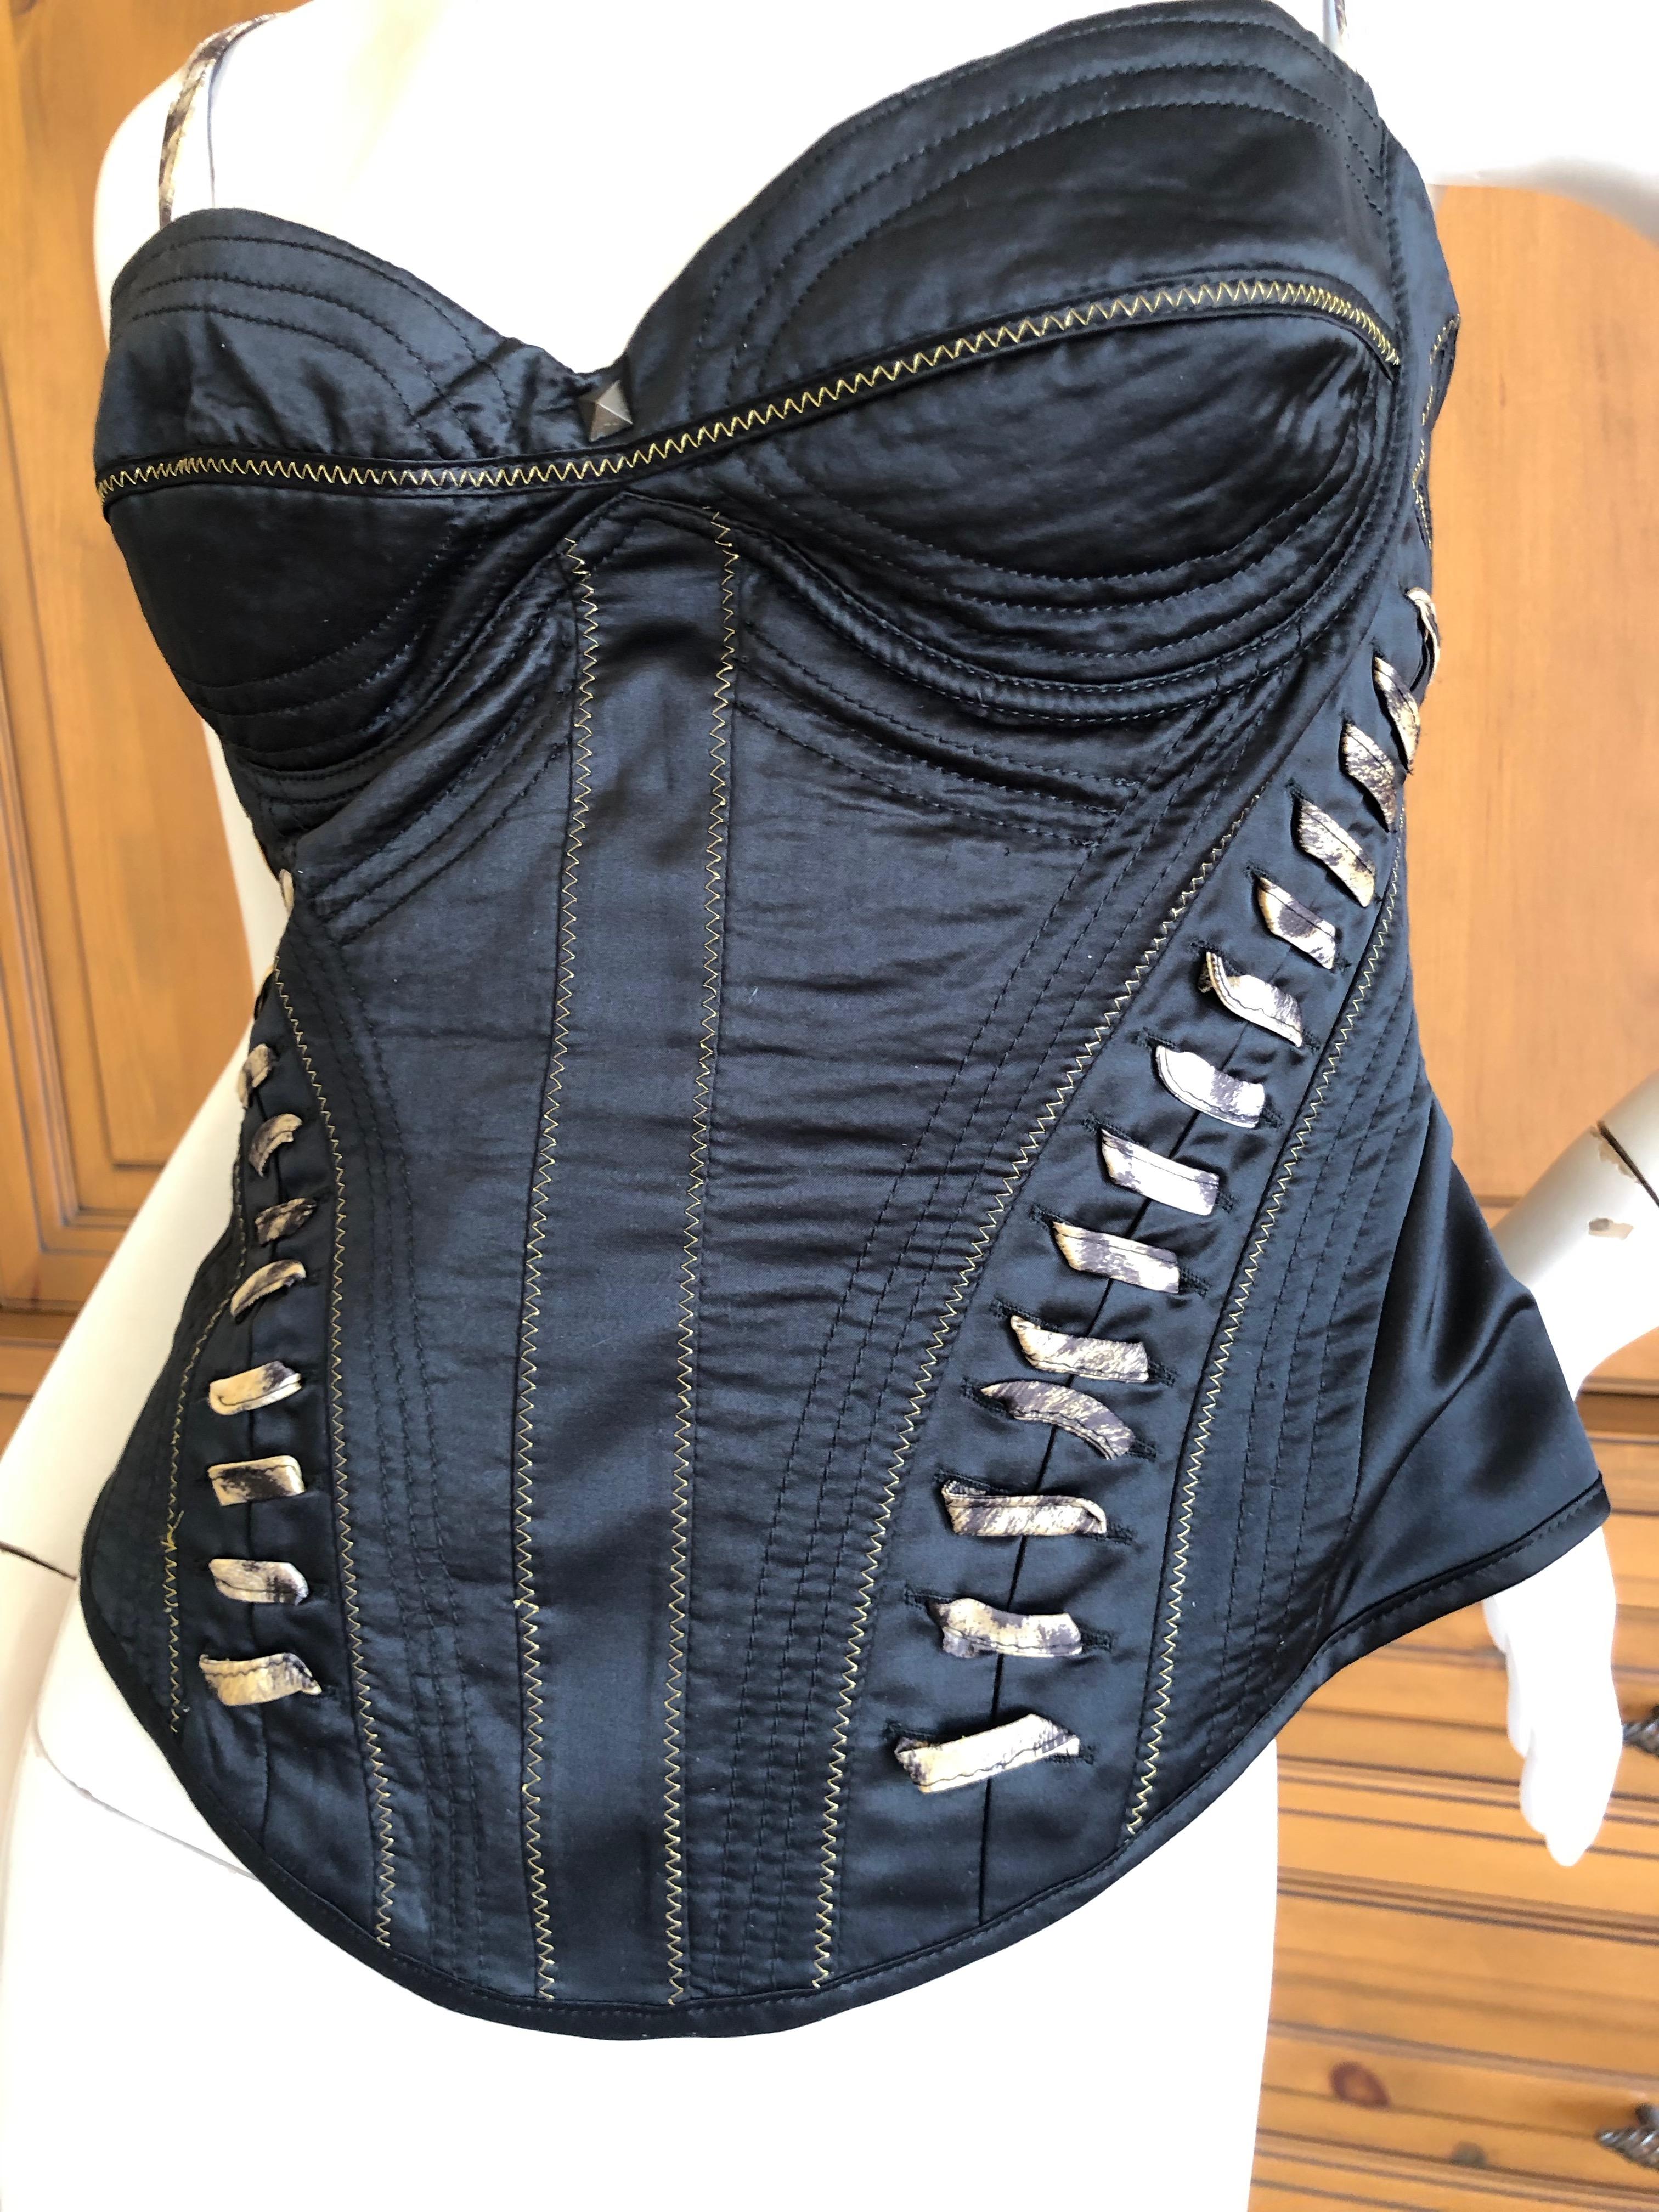 Roberto Cavalli for Just Cavalli Corset with Lace Up Details
Wonderful piece , front and back.
Size 42
Bust 34